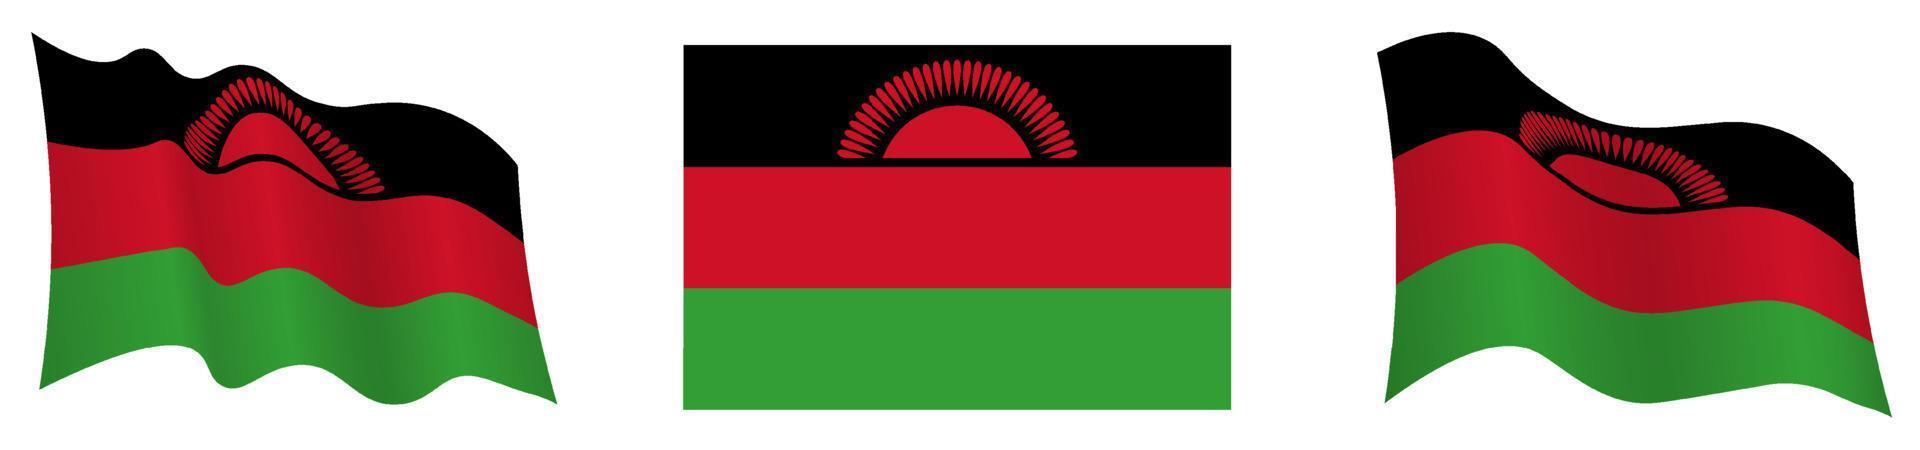 flag of Republic of Malawi in static position and in motion, fluttering in wind in exact colors and sizes, on white background vector